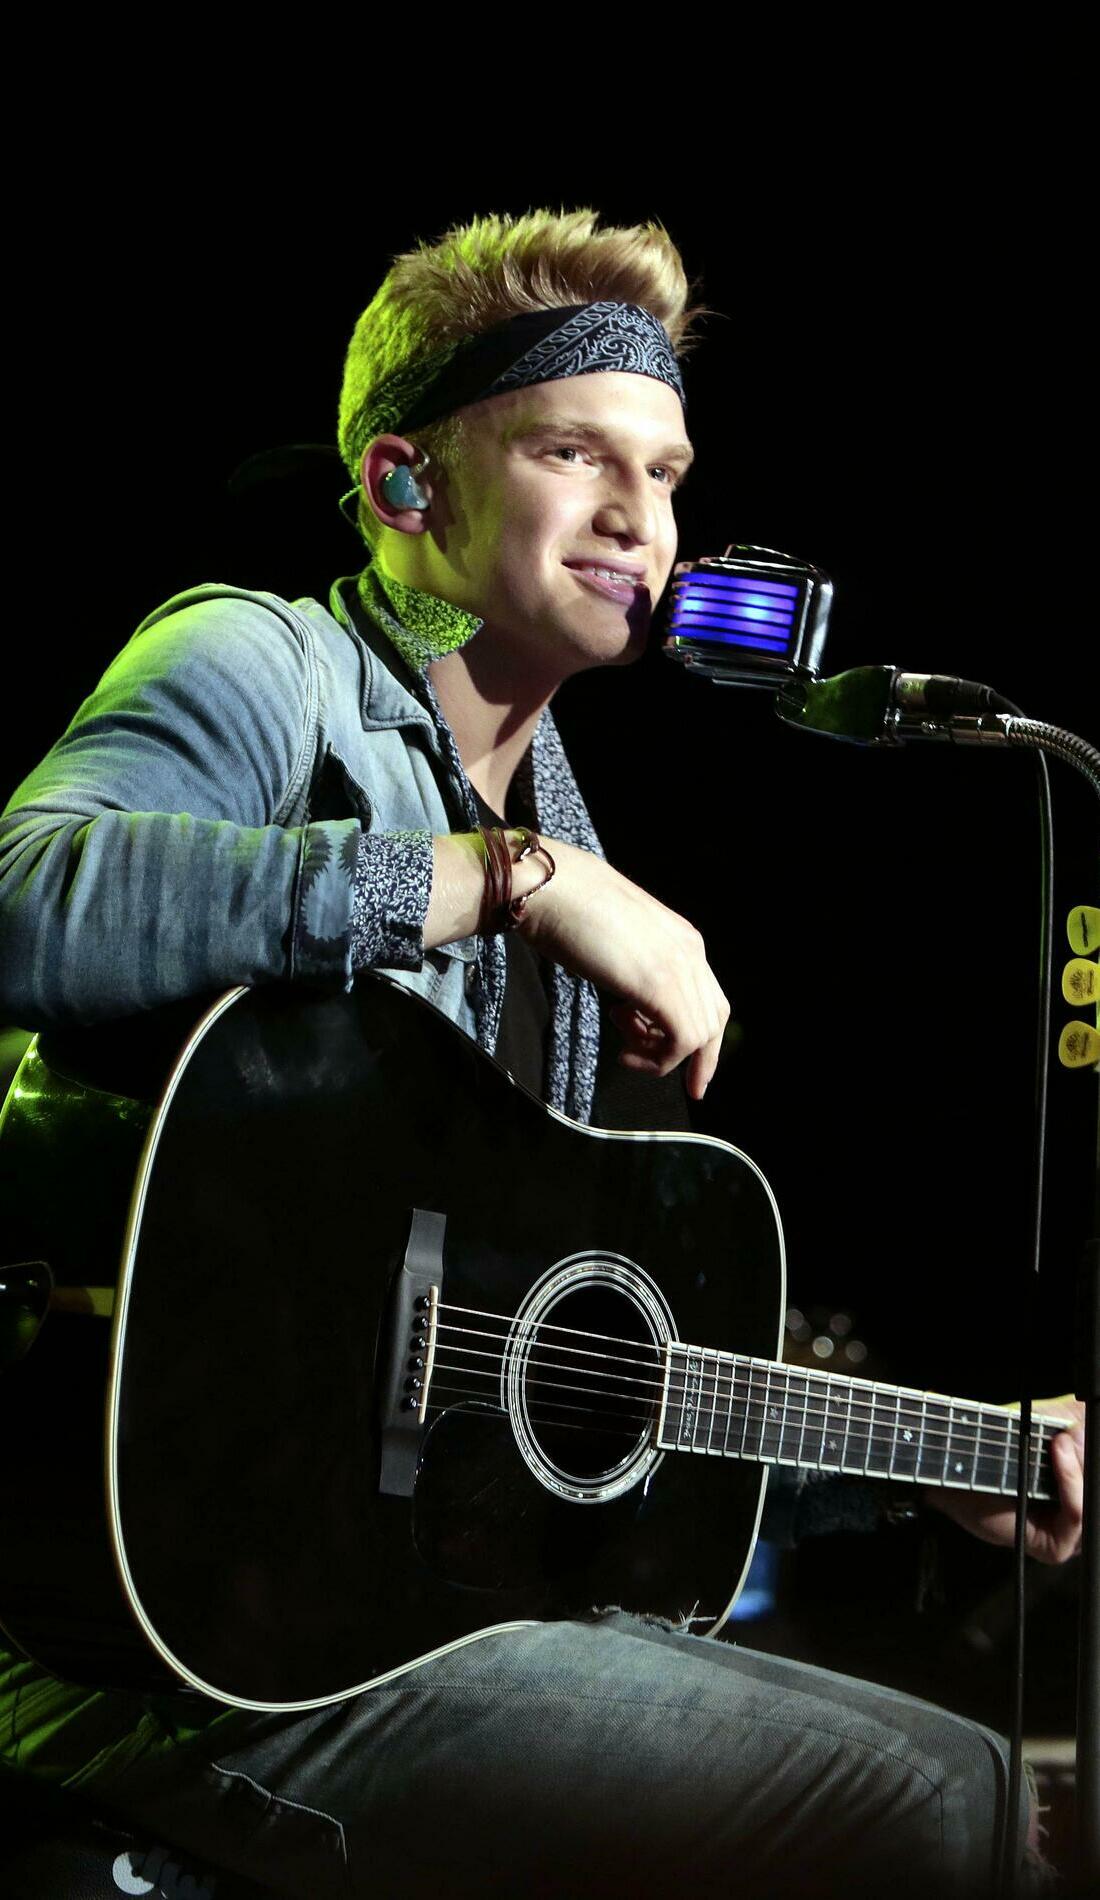 A Cody Simpson live event